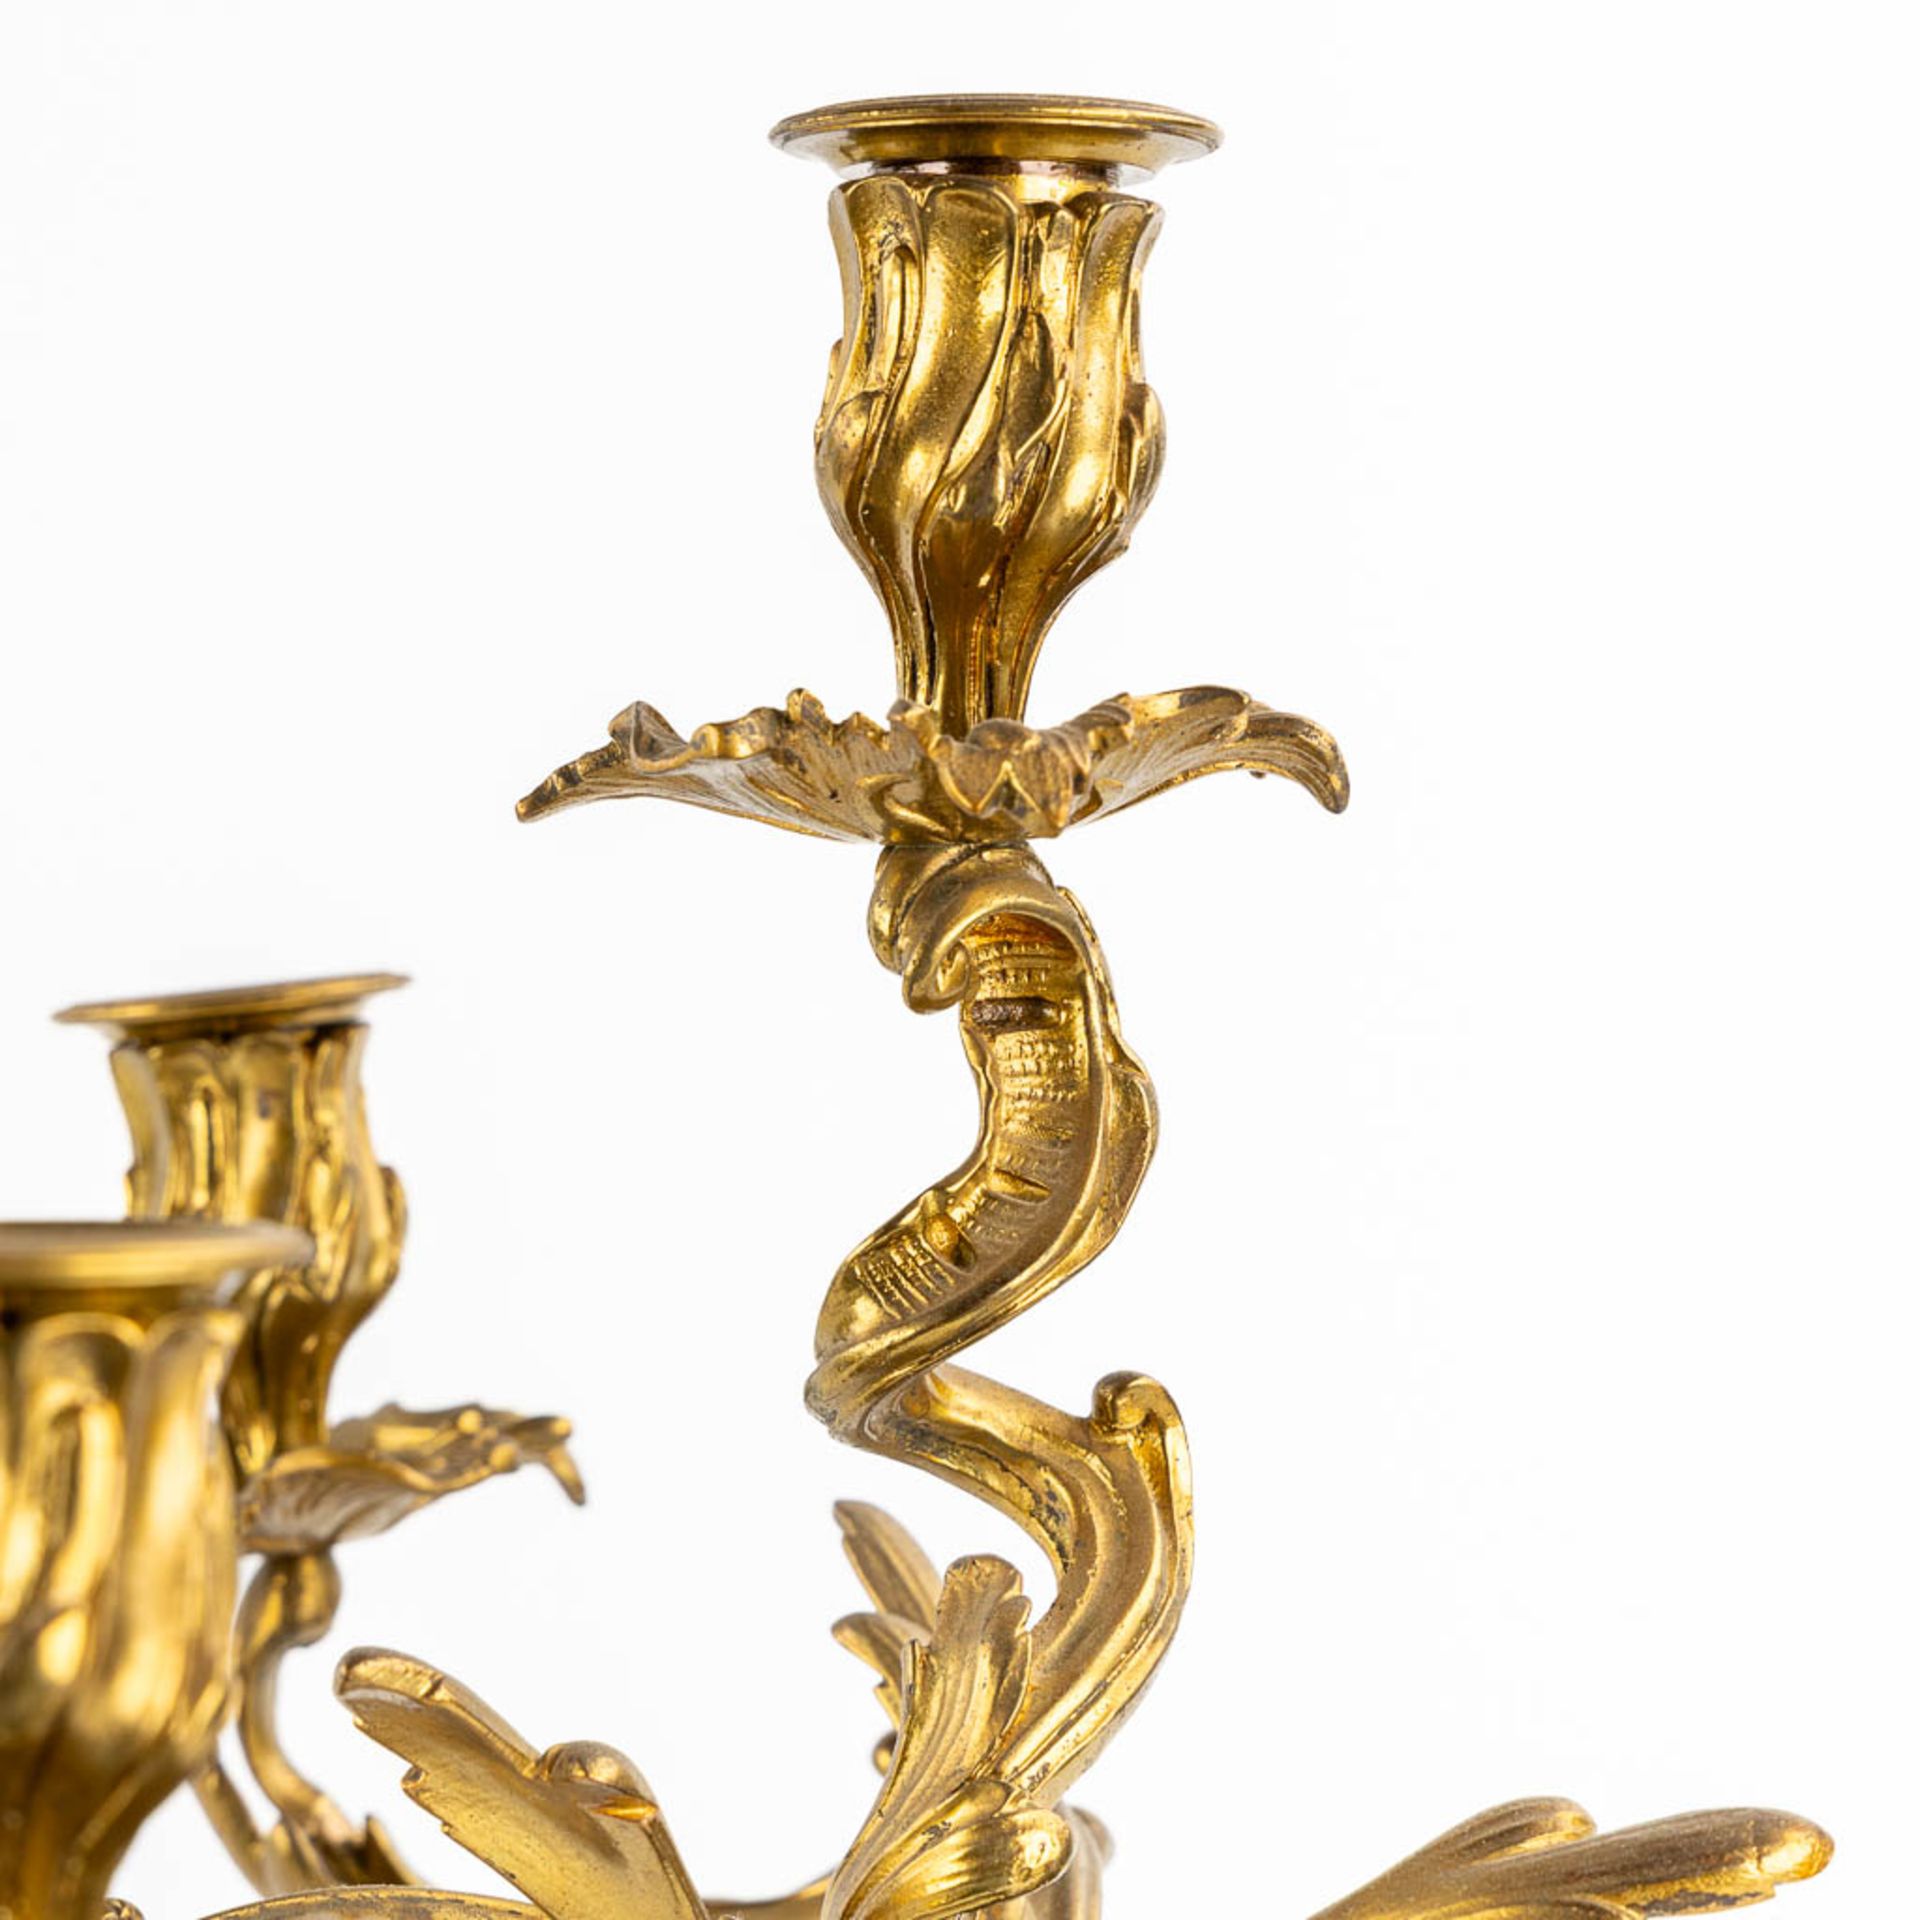 A pair of candelabra, bronze in Louis XV style. Circa 1900. (H:54 x D:27 cm) - Image 7 of 9